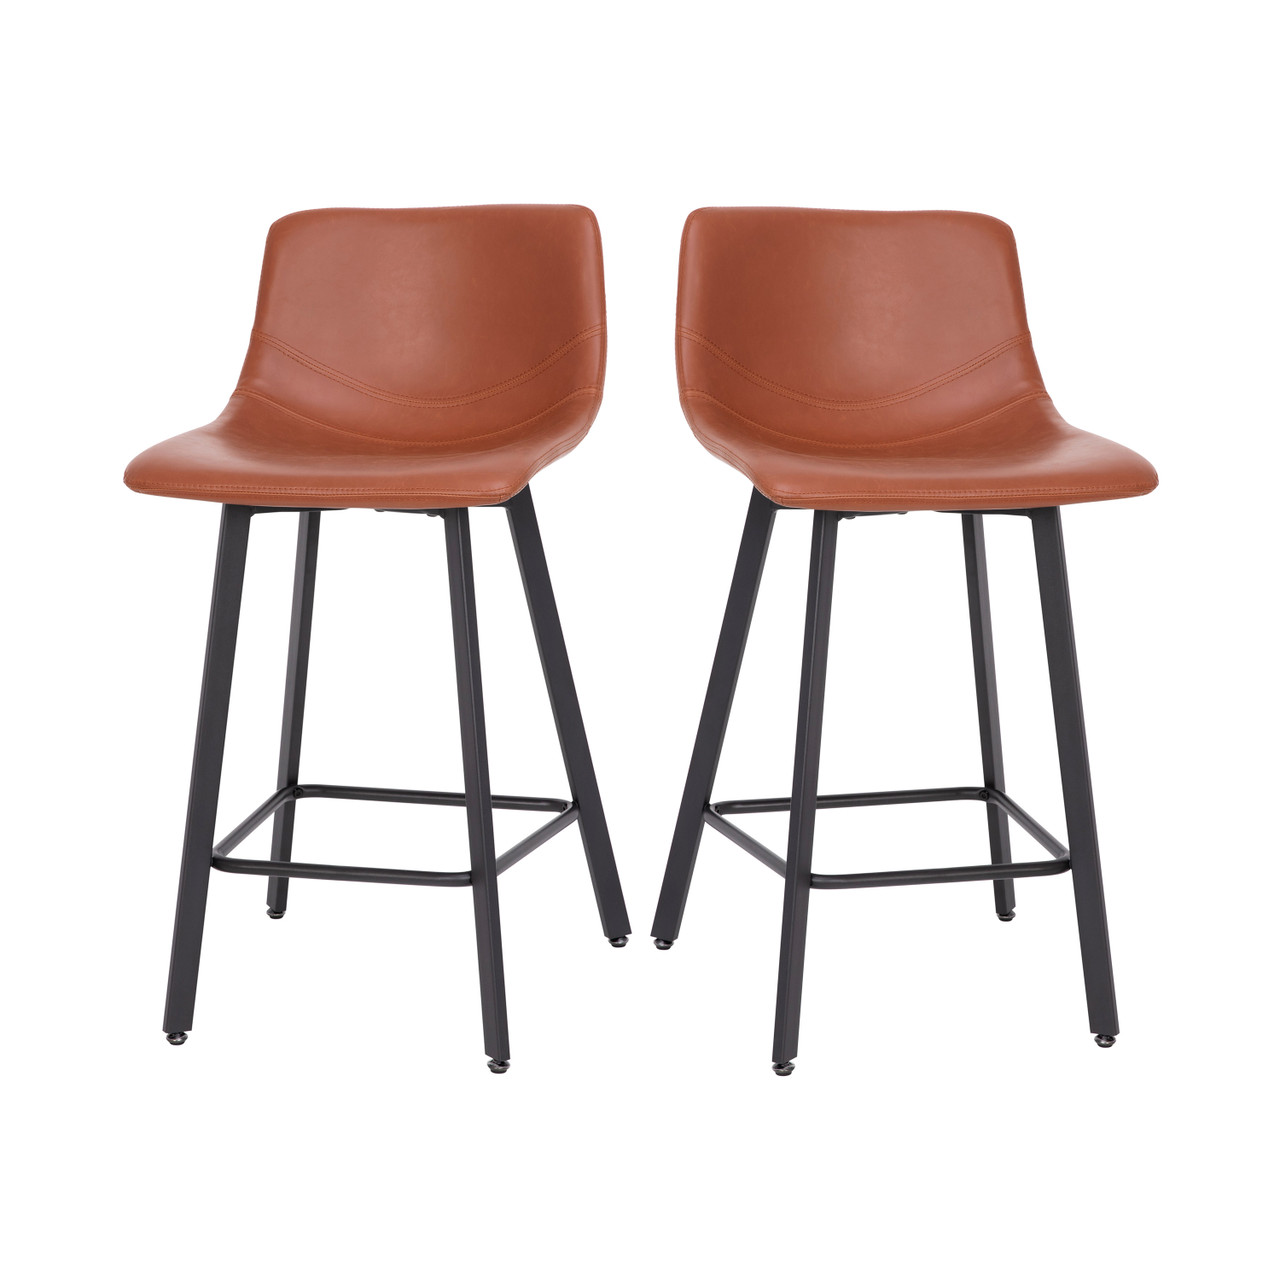 Flash Furniture Caleb Modern Armless 24 Inch Counter Height Stools Commercial Grade w/ Footrests in Cognac LeatherSoft & Black Matte Metal Frames, Set